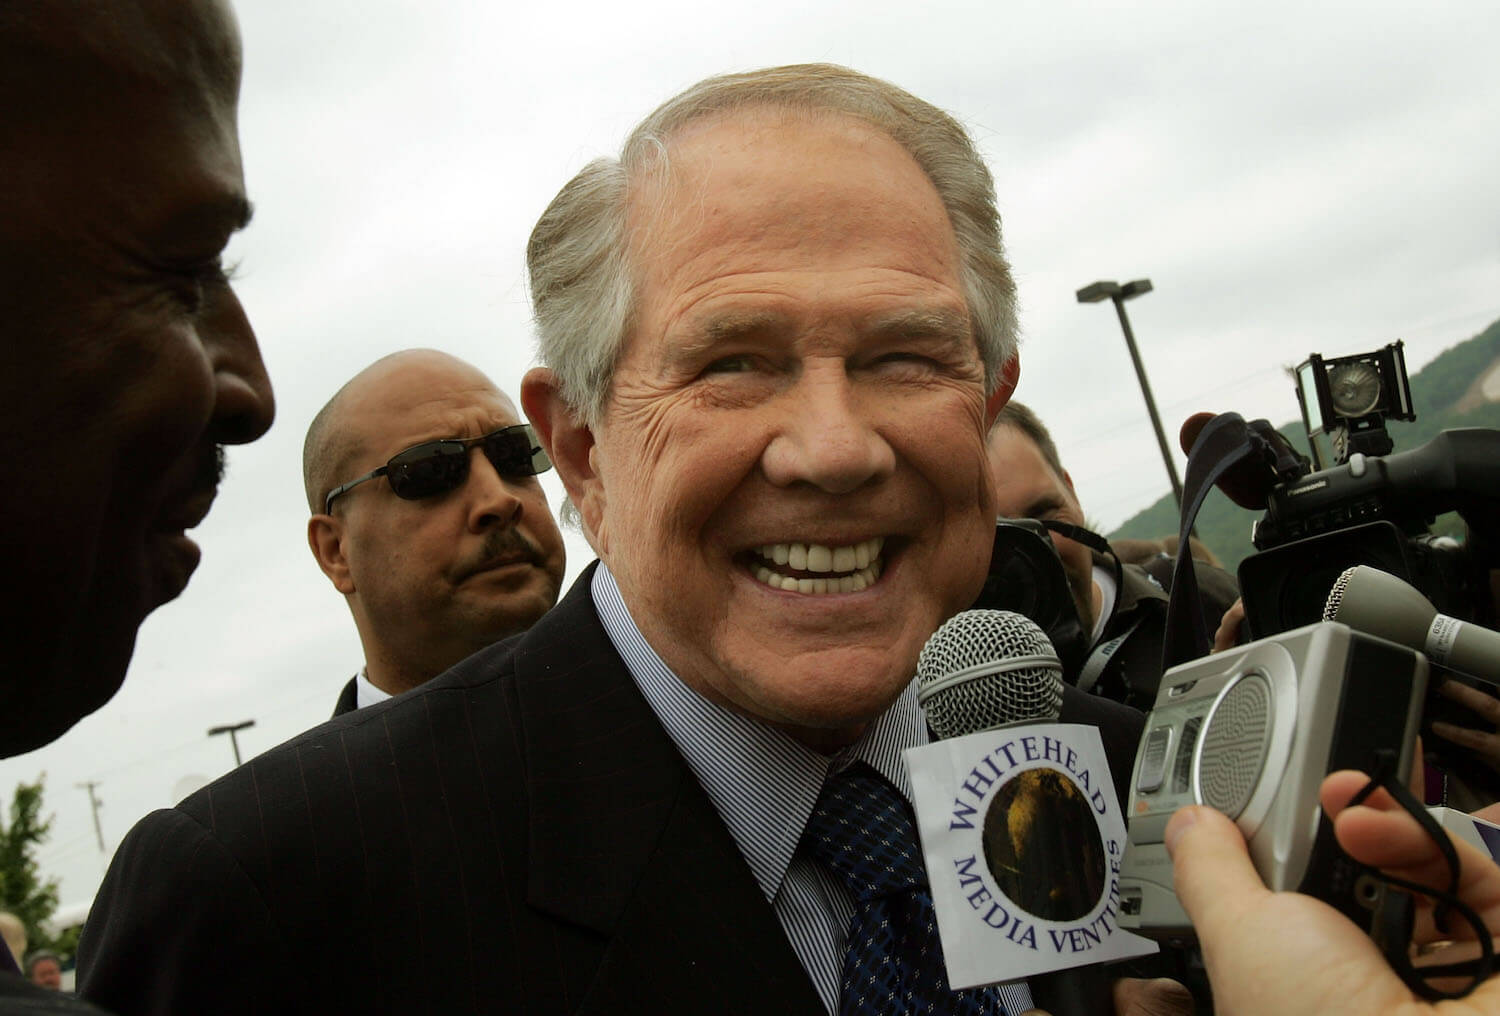 Christian Broadcasting Network founder Pat Robertson smiling around reporters